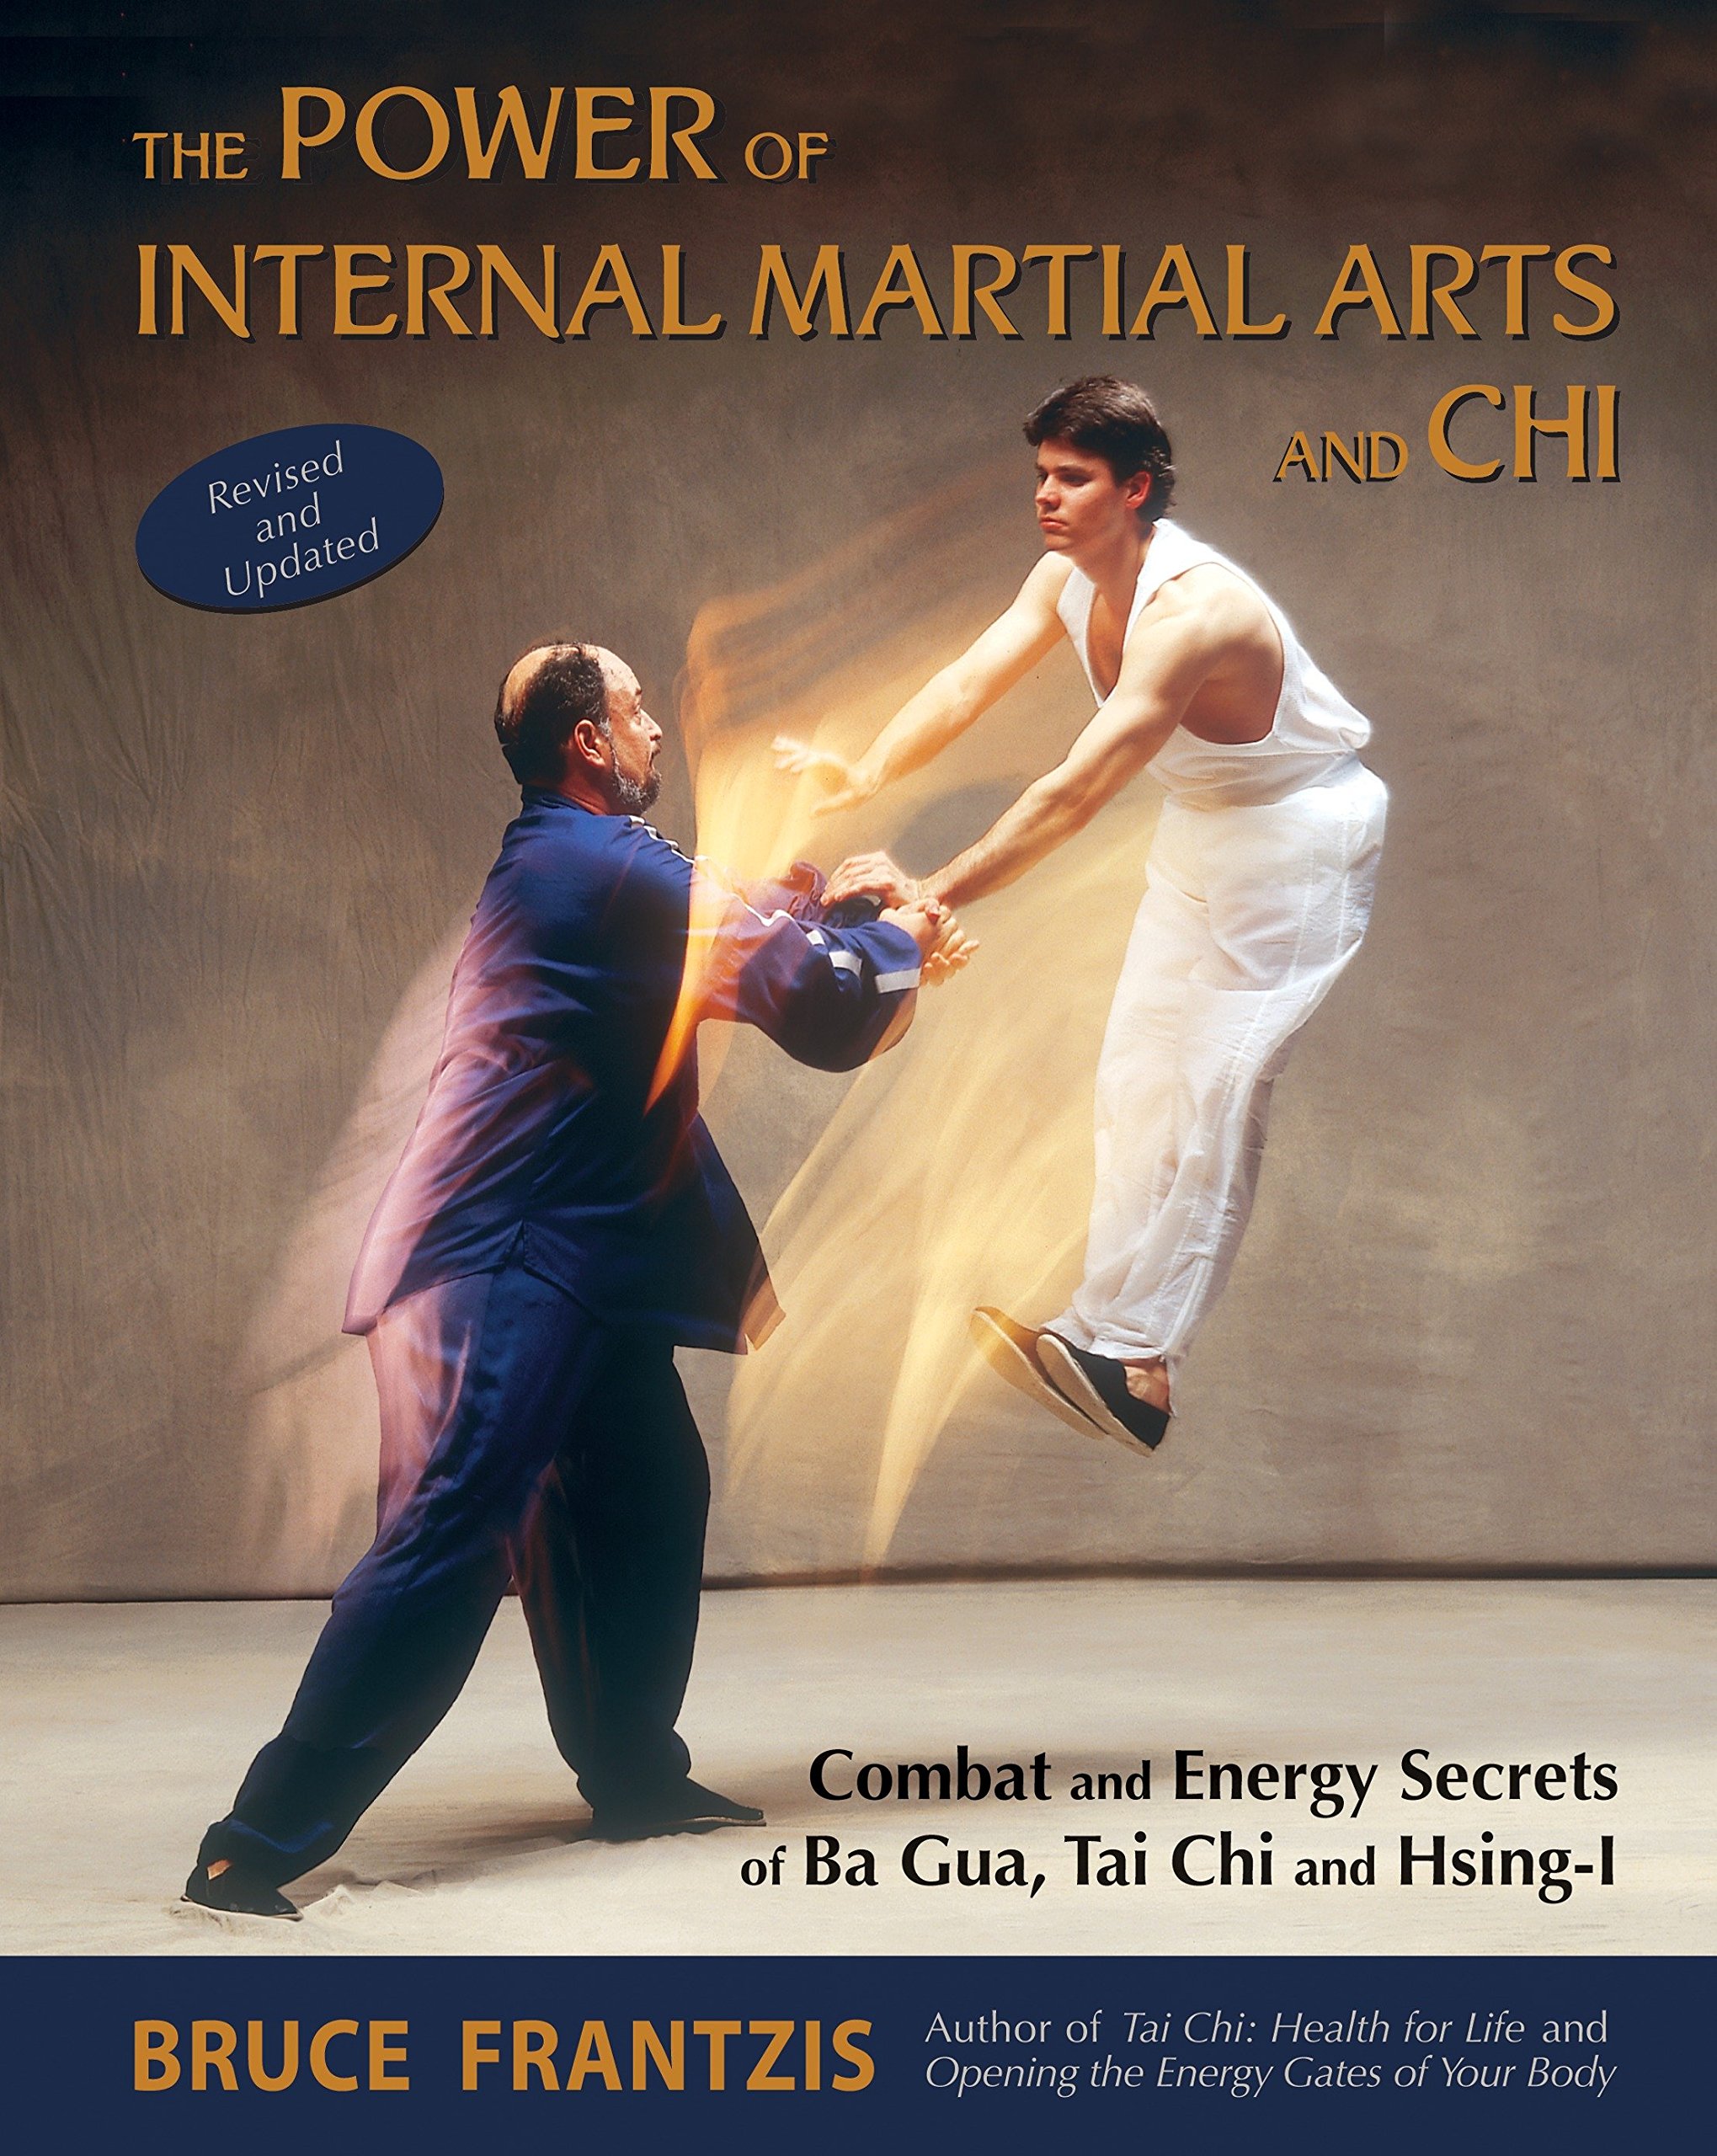 Bruce Frantzis - The Power of Internal Martial Arts and Chi